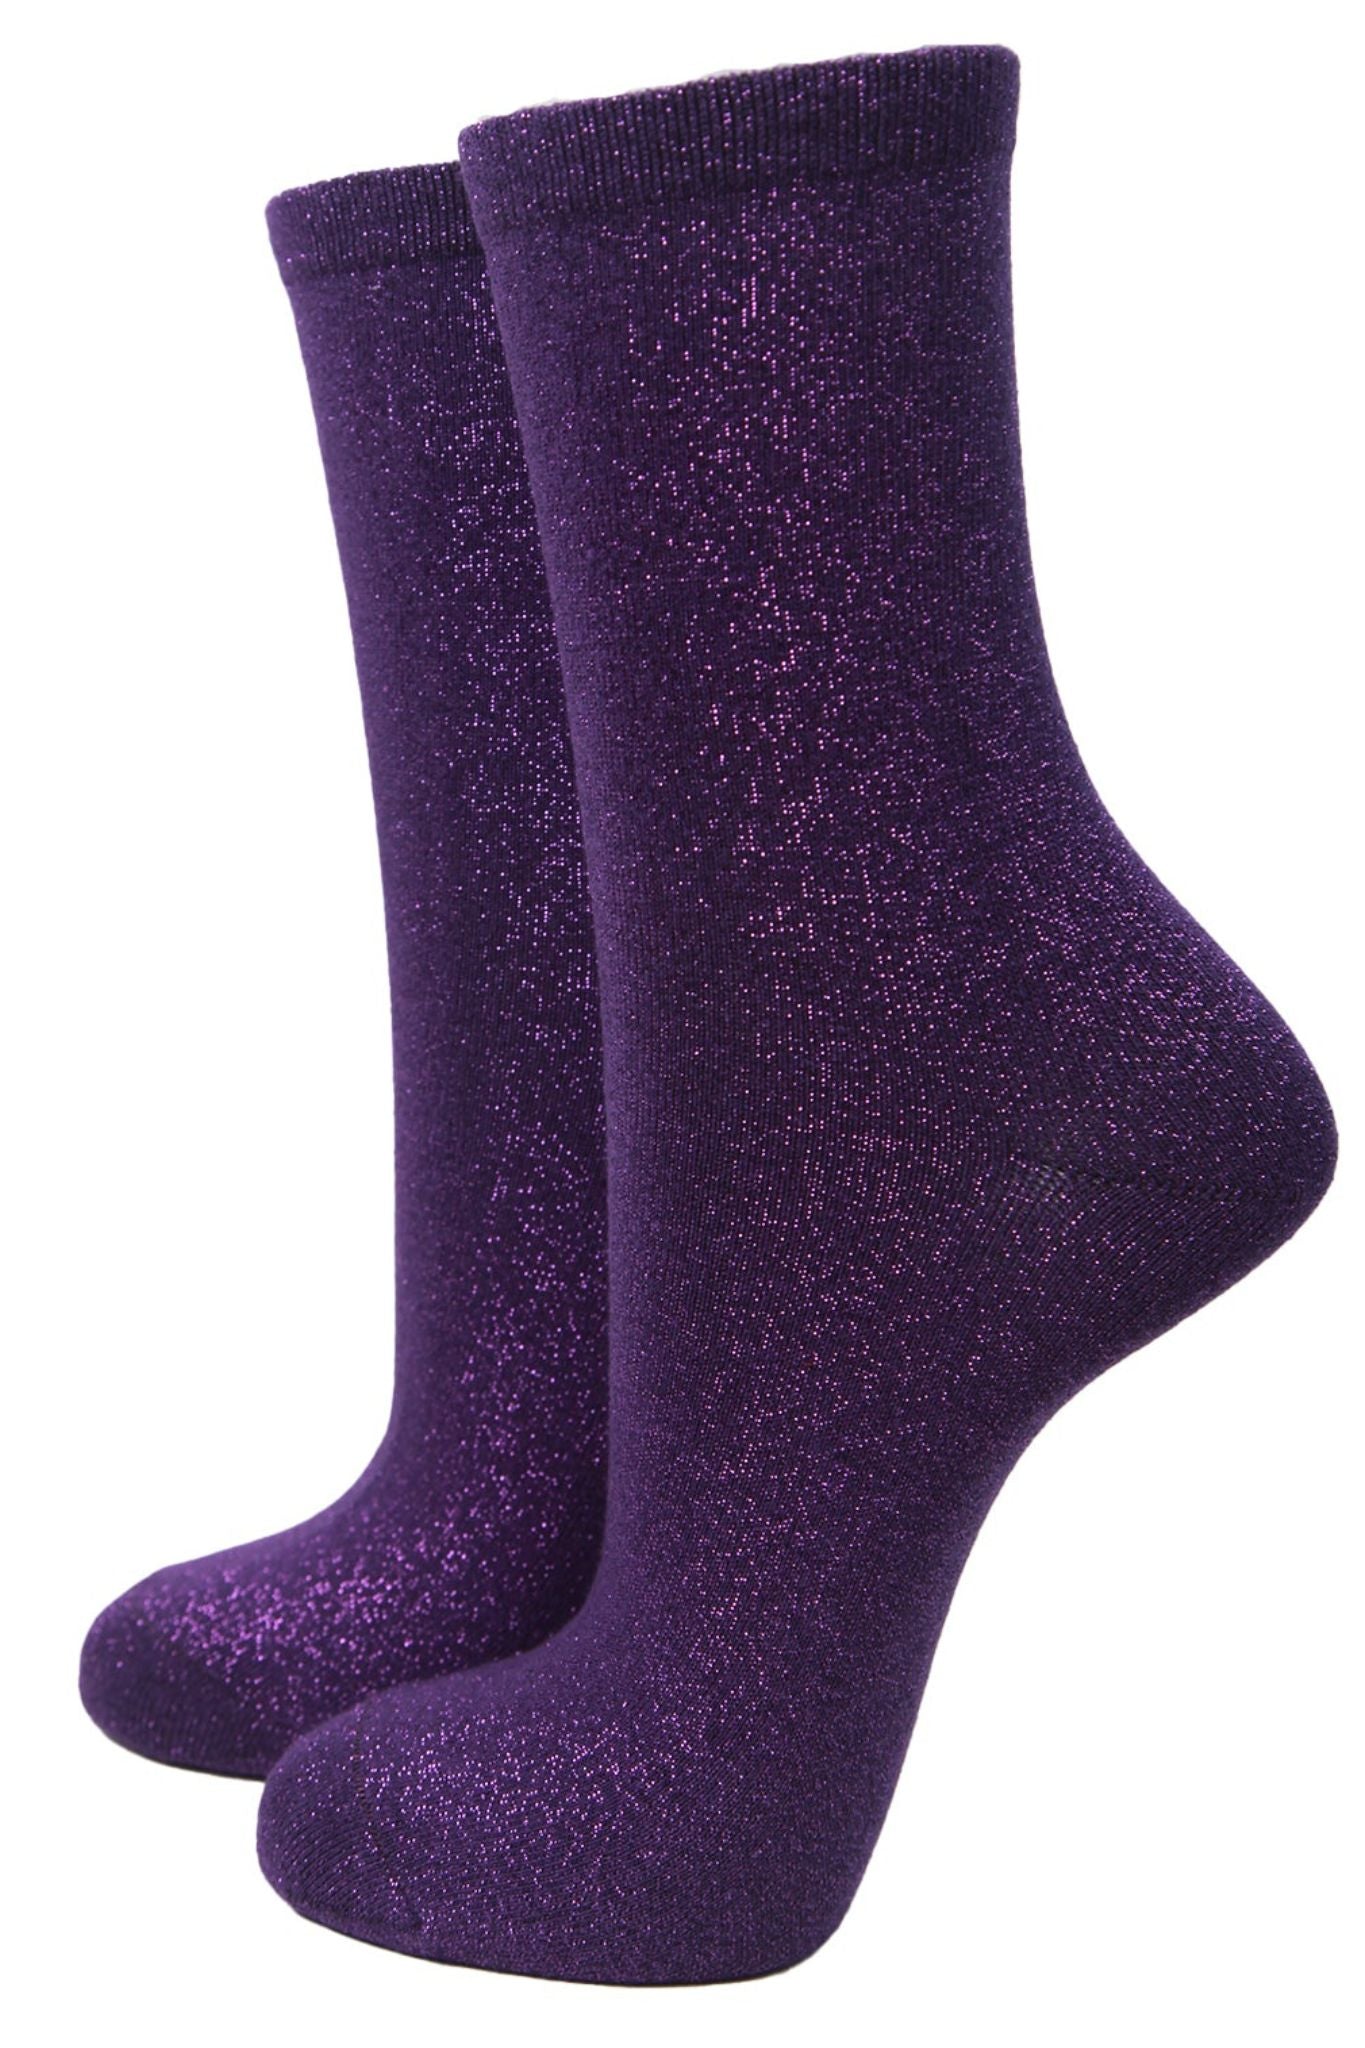 purple glitter ankle socks with all over shimmer effect